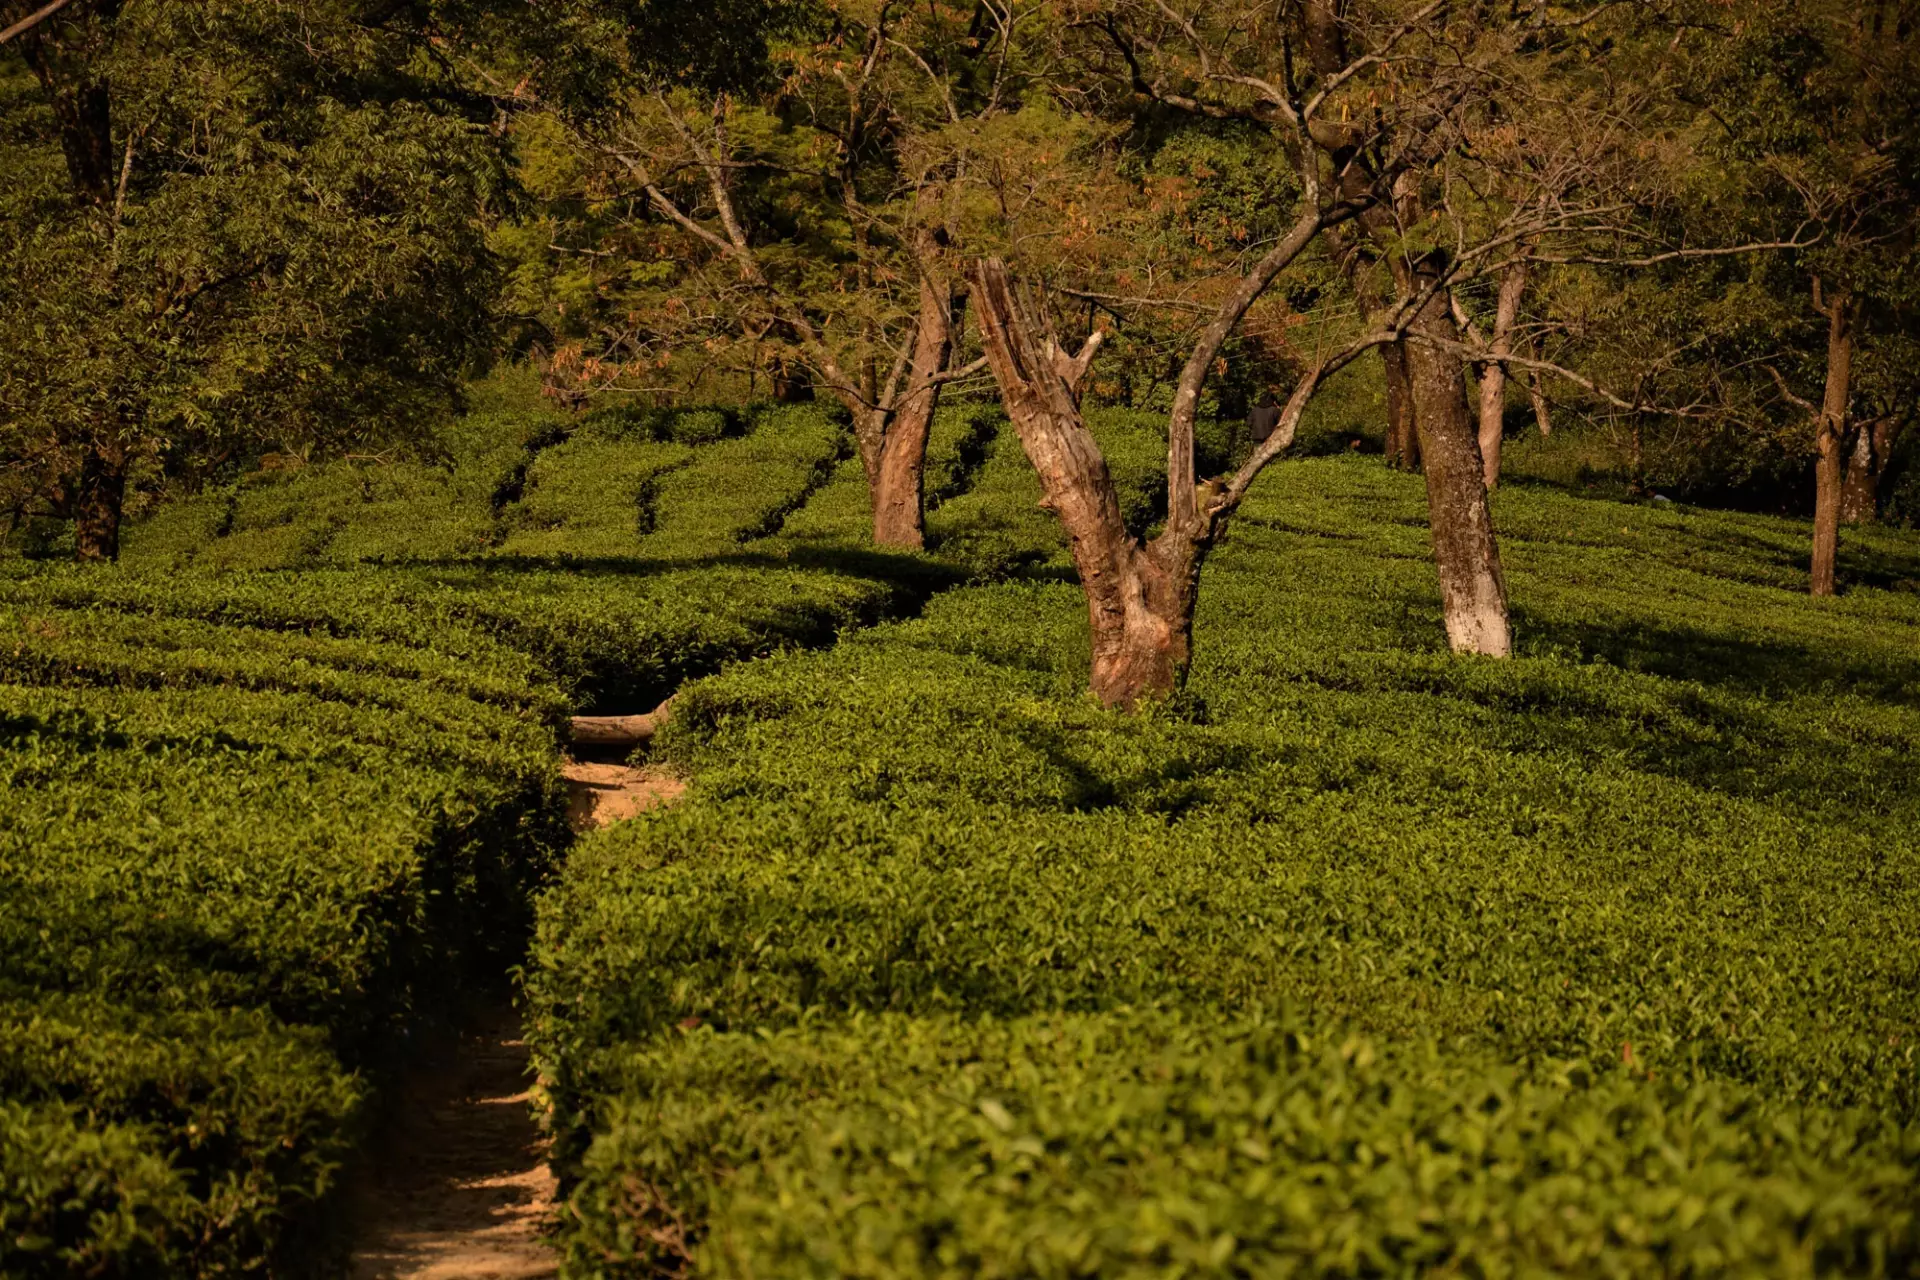 Riding Across Indian Tea Gardens from the UK